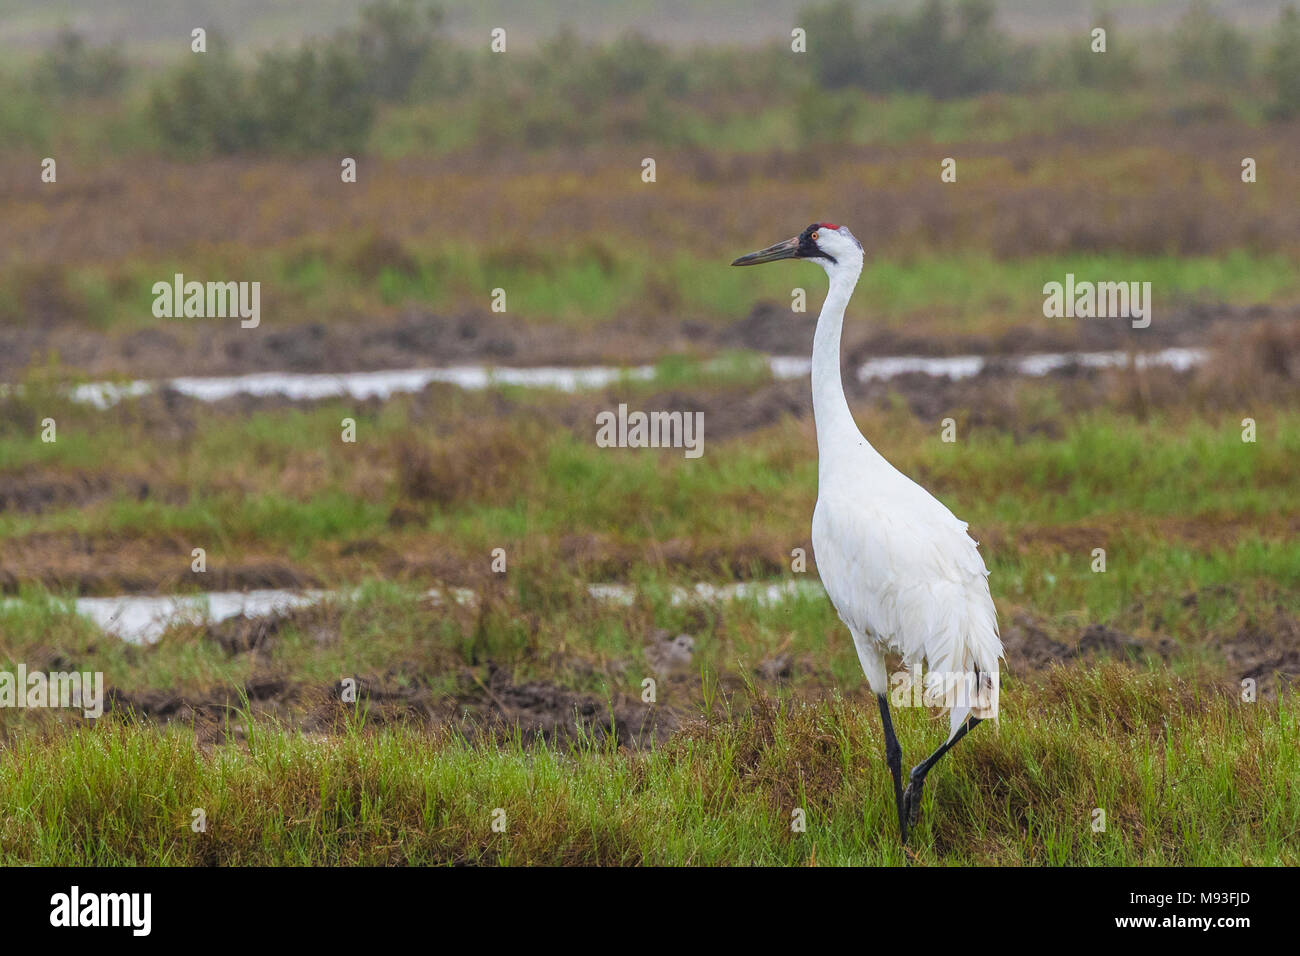 Whooping Cranes in Aransas National Wildlife Refuge on a misty, foggy morning Stock Photo